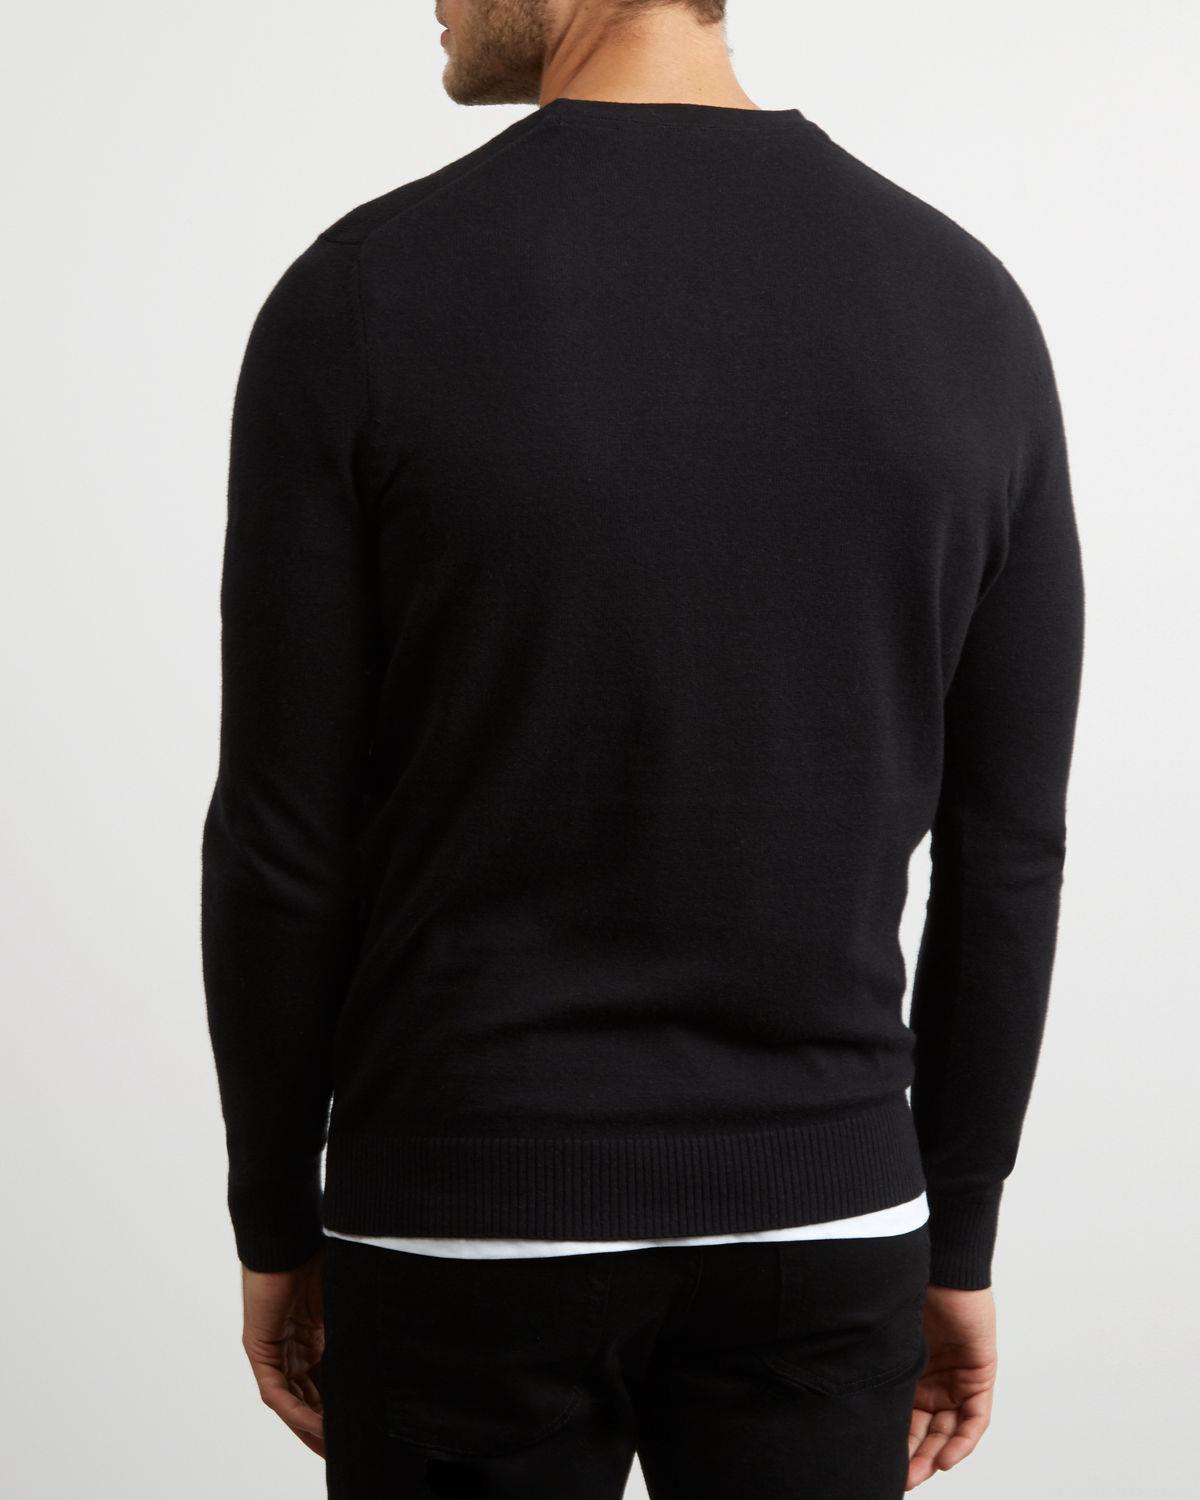 Men's sweater in cotton and merino wool blend